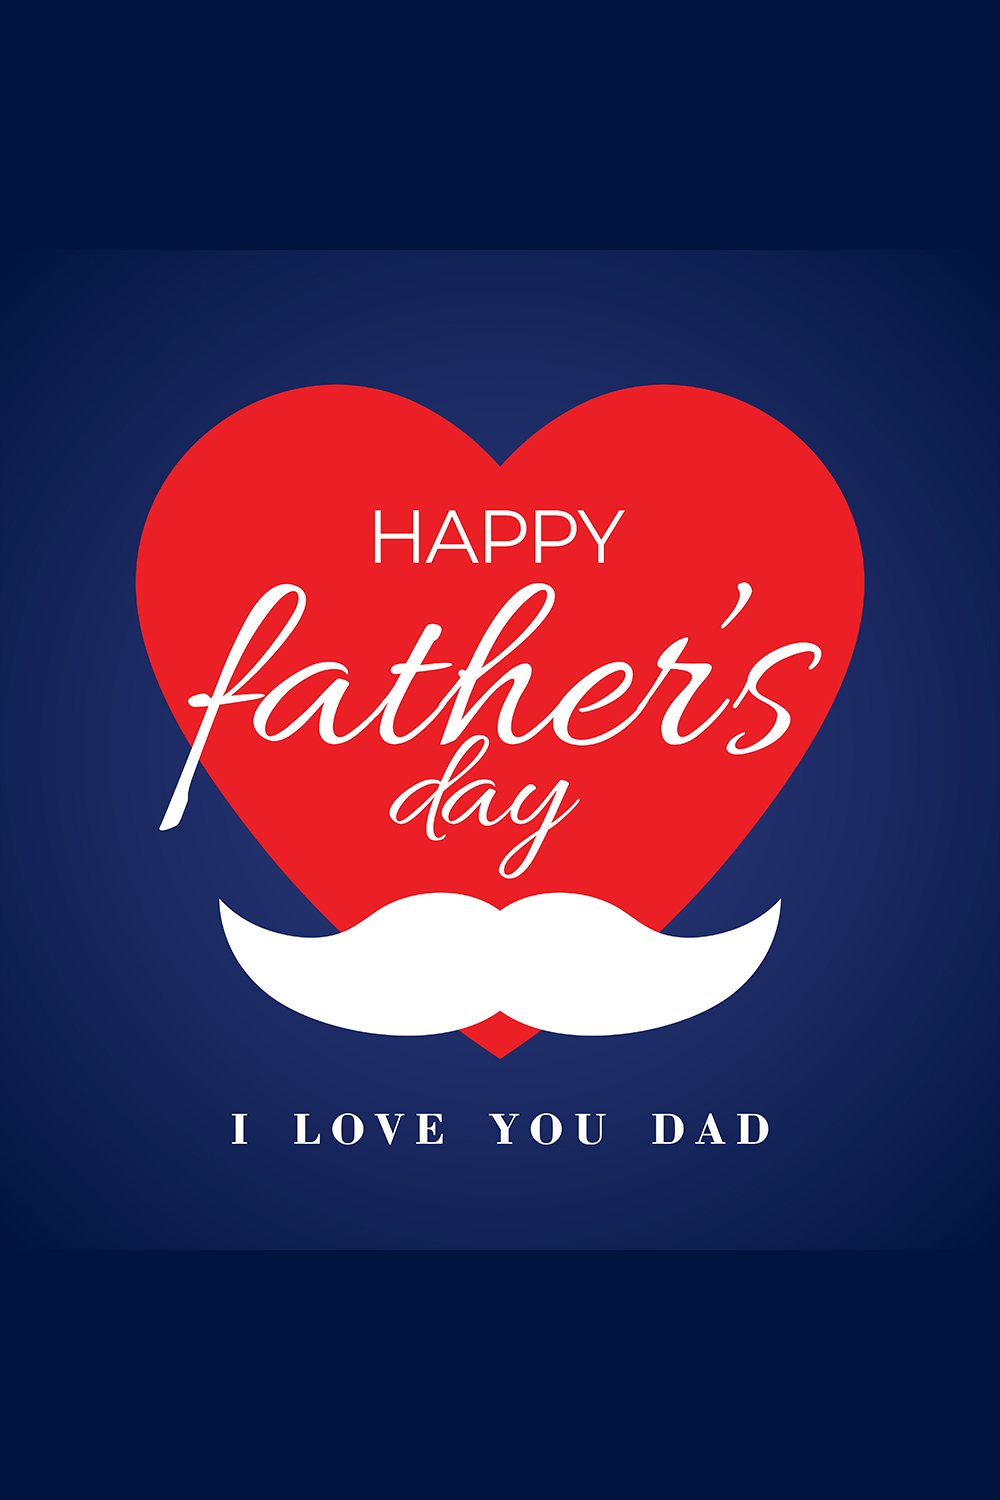 Happy father's day design templates pinterest preview image.